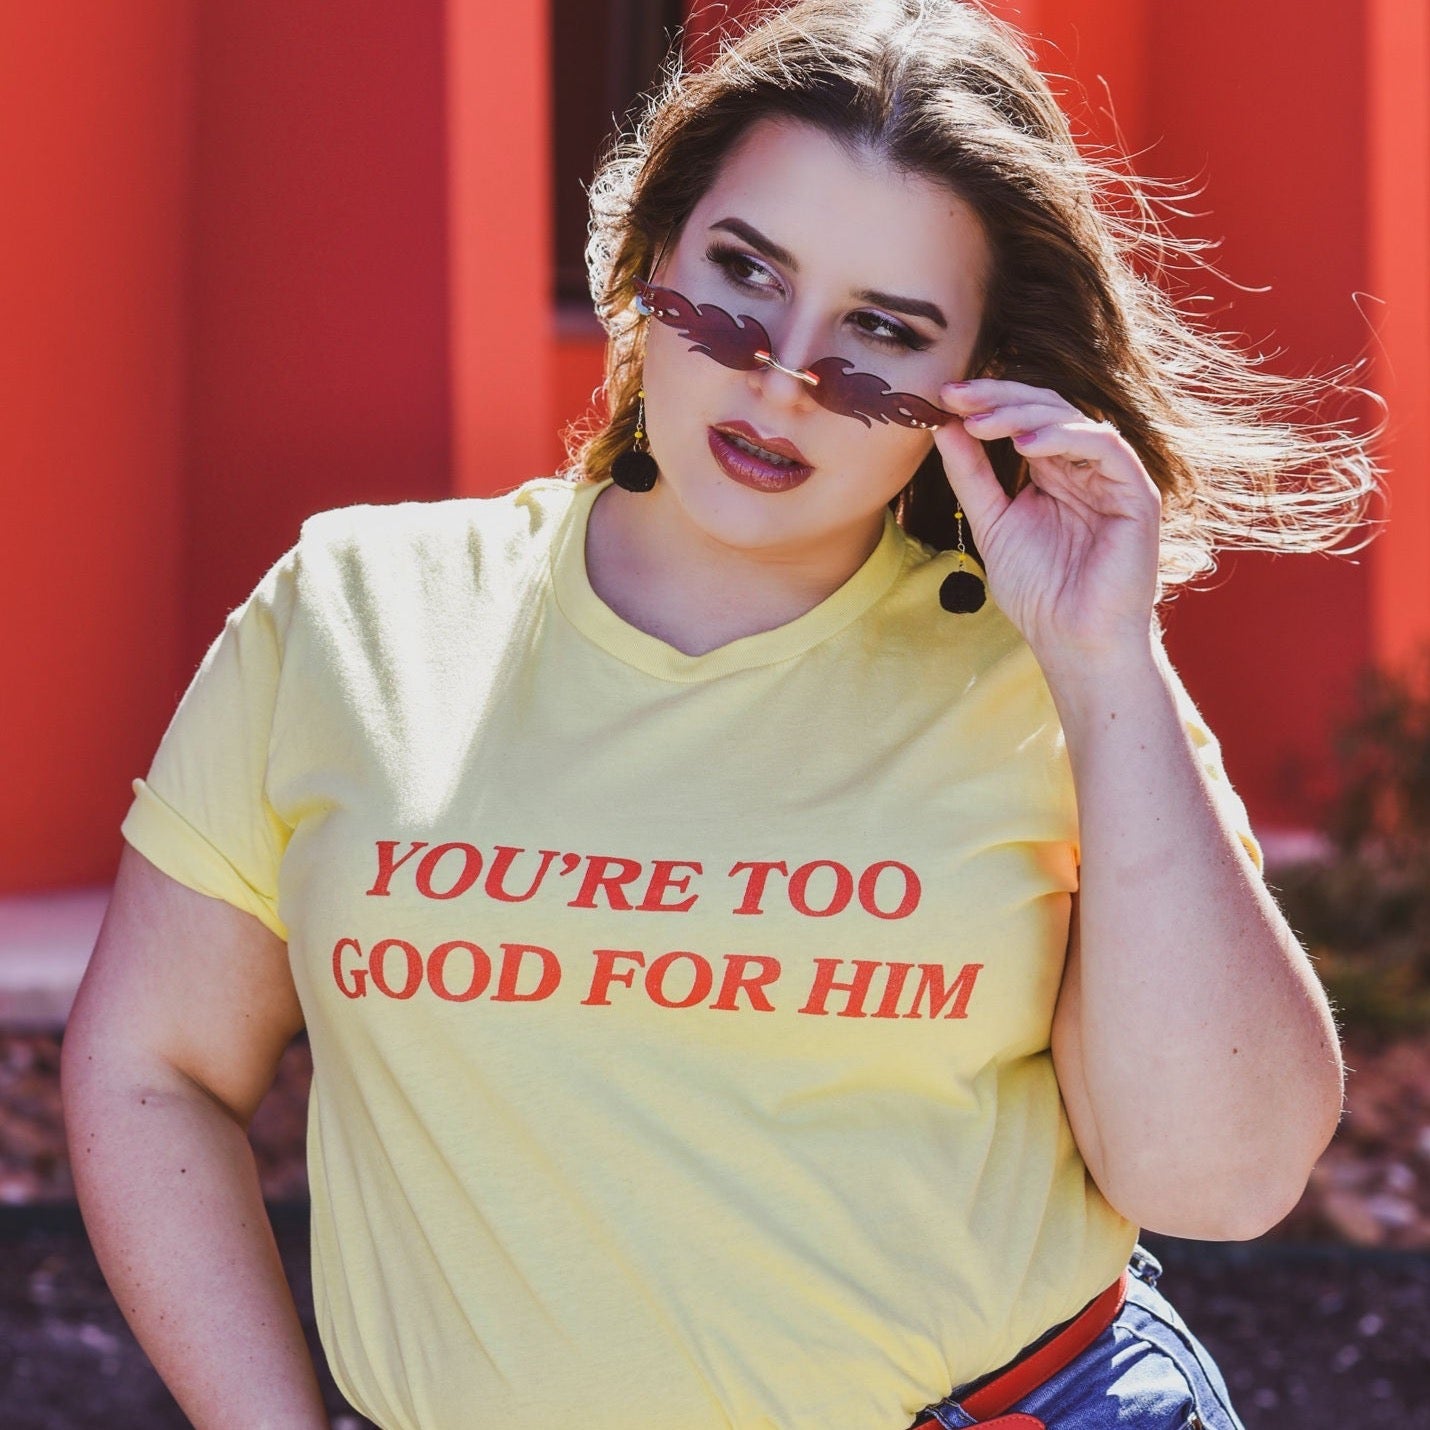 You're Too Good For Him Unisex Yellow Feminist T-shirt - Feminist Trash Store - Shop Feminist Apparel - Yellow Plus Size Shirt